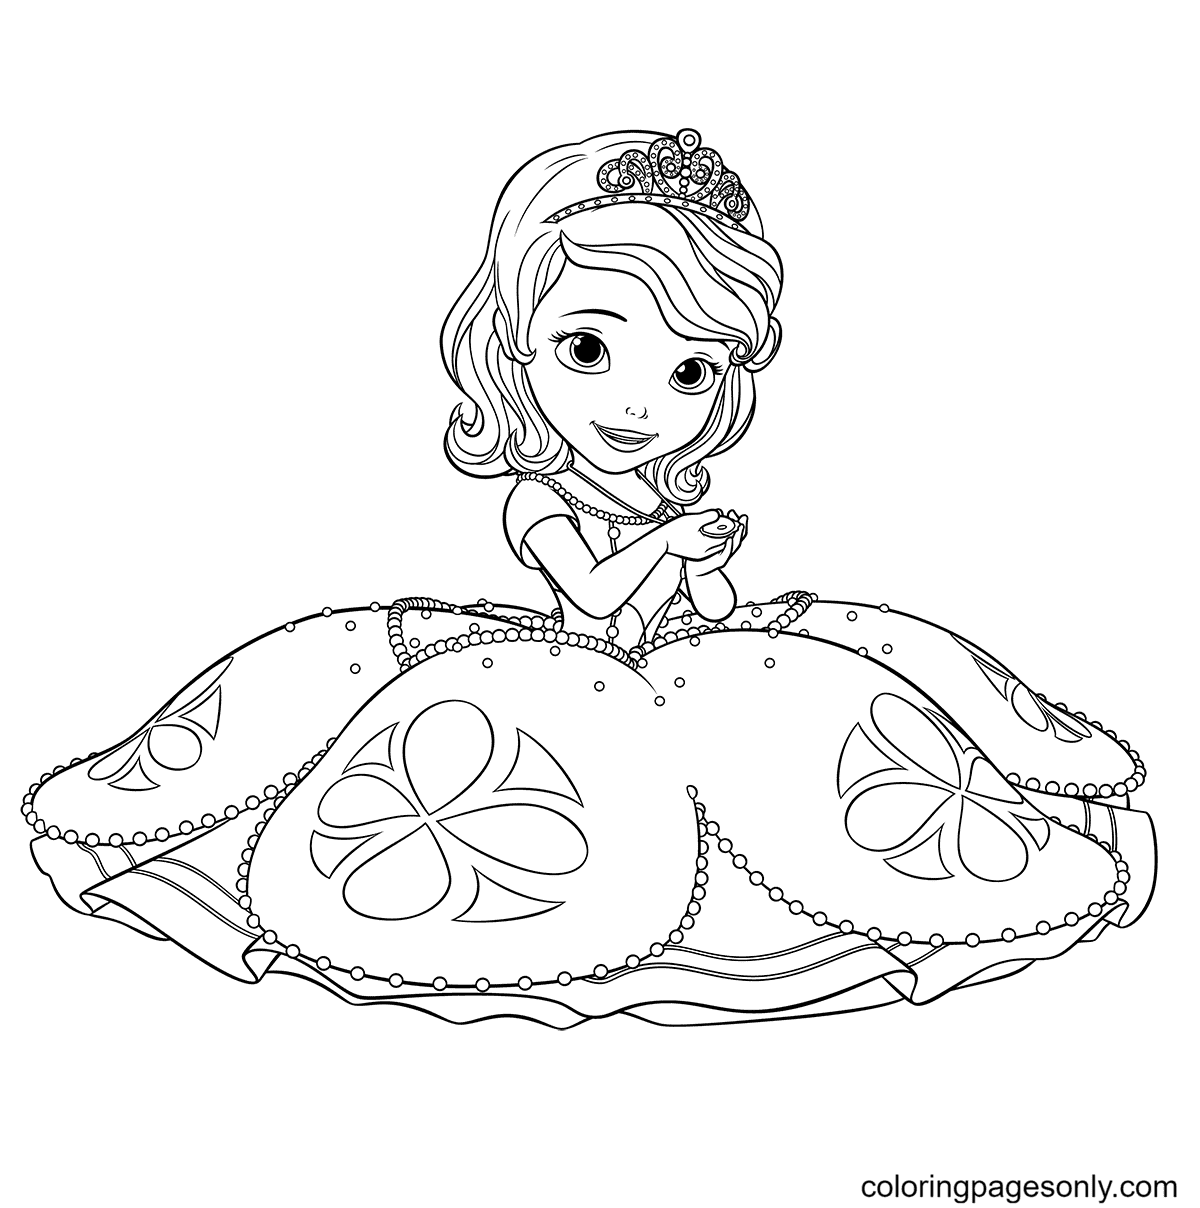 Lovely Princess Sofia Coloring Page